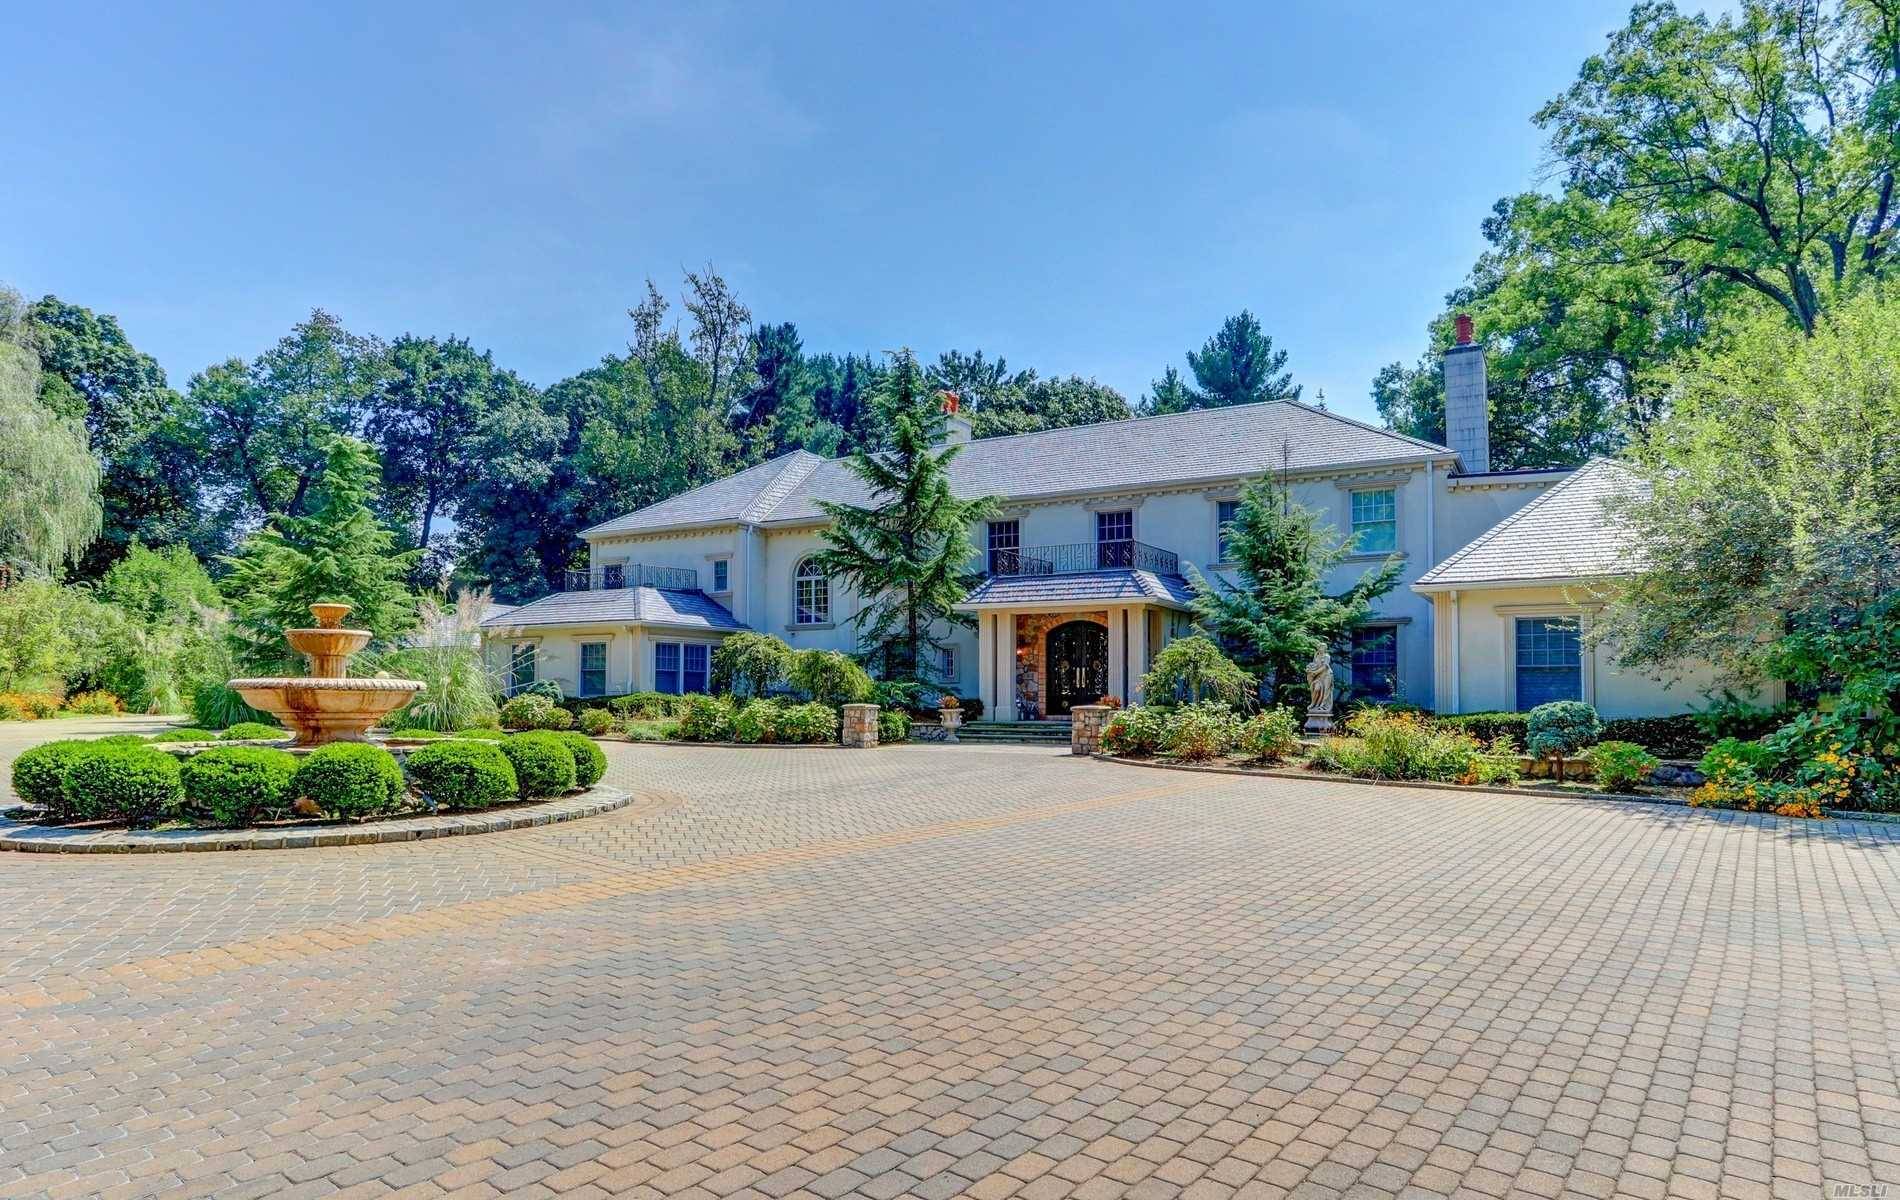 Set Behind Gated Entry on 4 acres w IG Gunite Pool, this Magnificent 9yr Gold Coast Estate Offers Unparalleled Luxury, Spacious Formal Rooms w Fireplaces, Fabulous Chef's Kitchen which opens ...